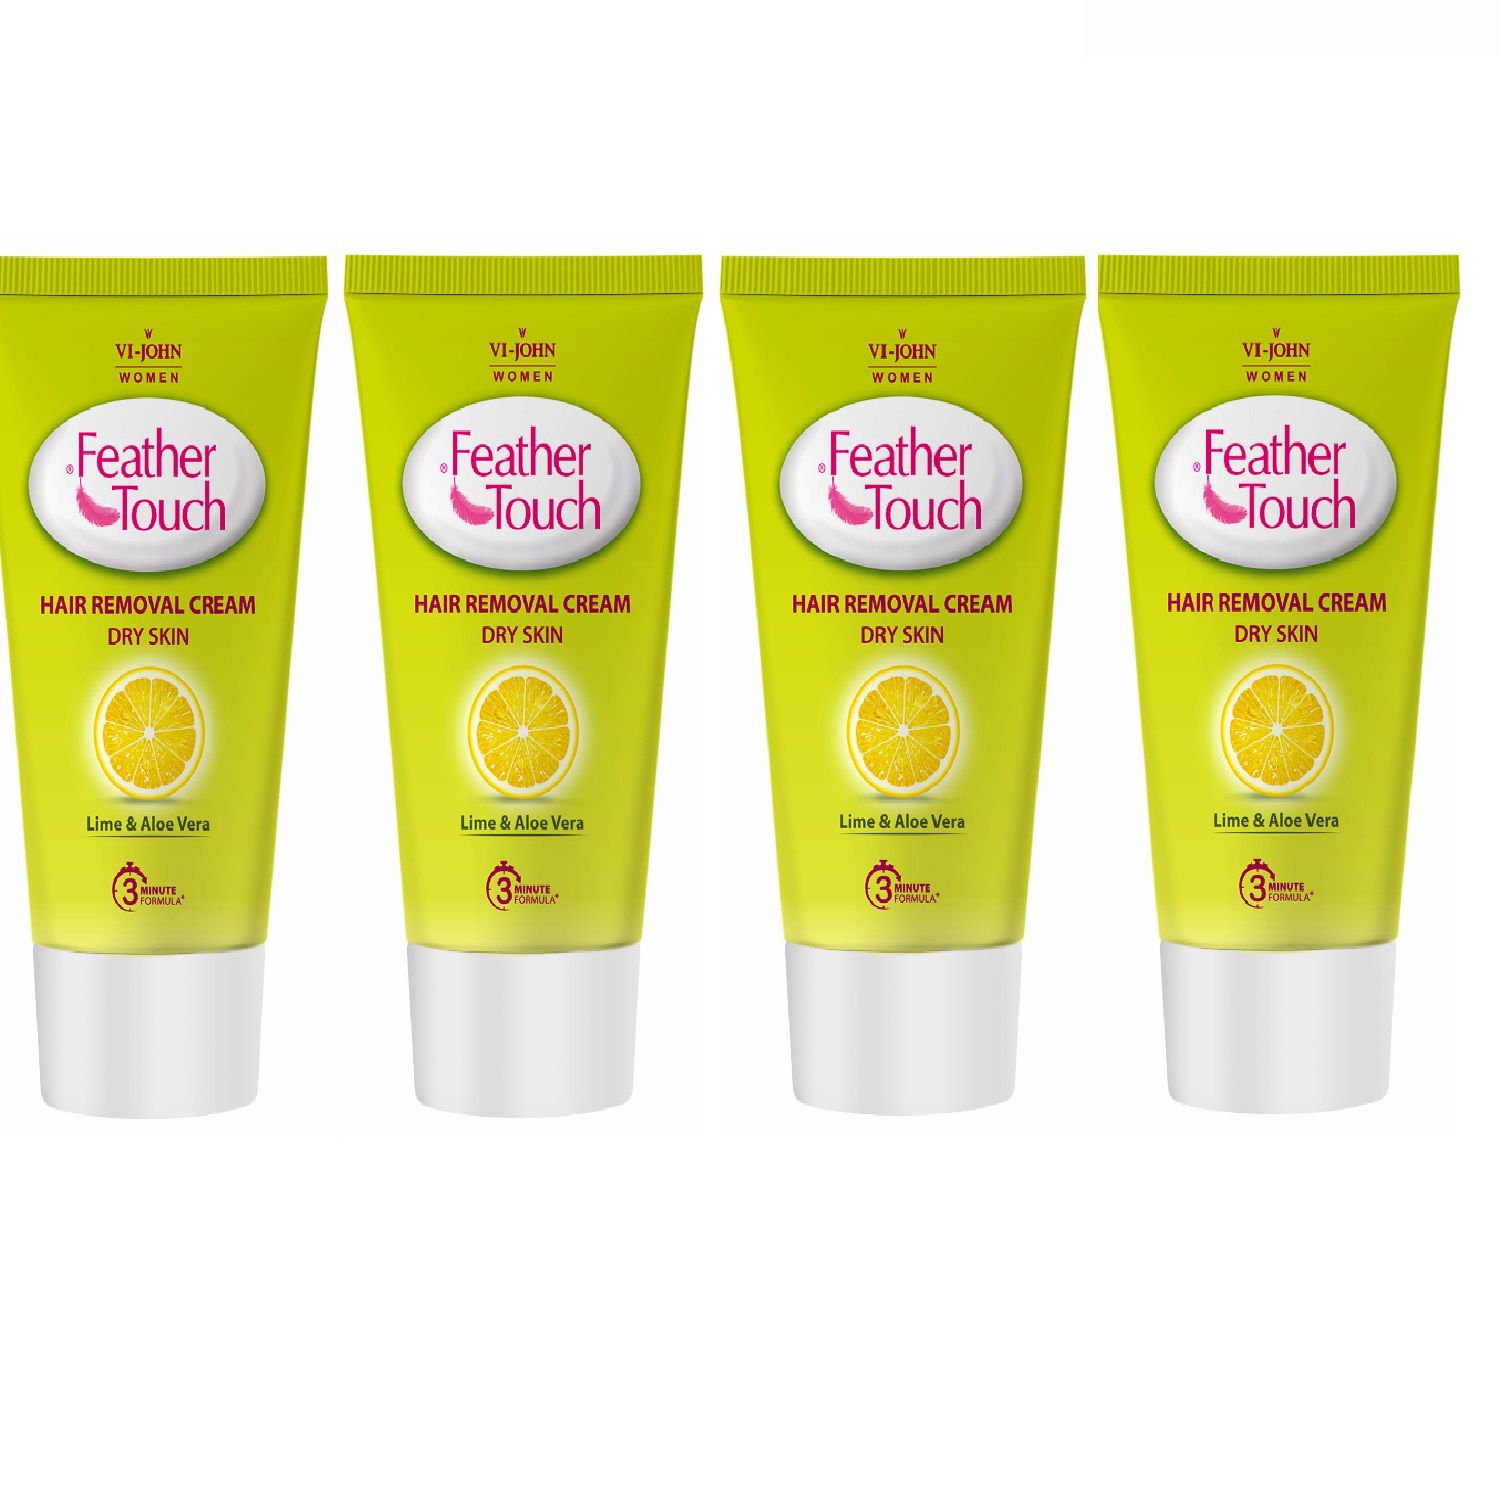     			VIJOHN Feather Touch Lime & Aloevera Hair Removal Cream for Dry Skin 40g Each (Pack of 4)